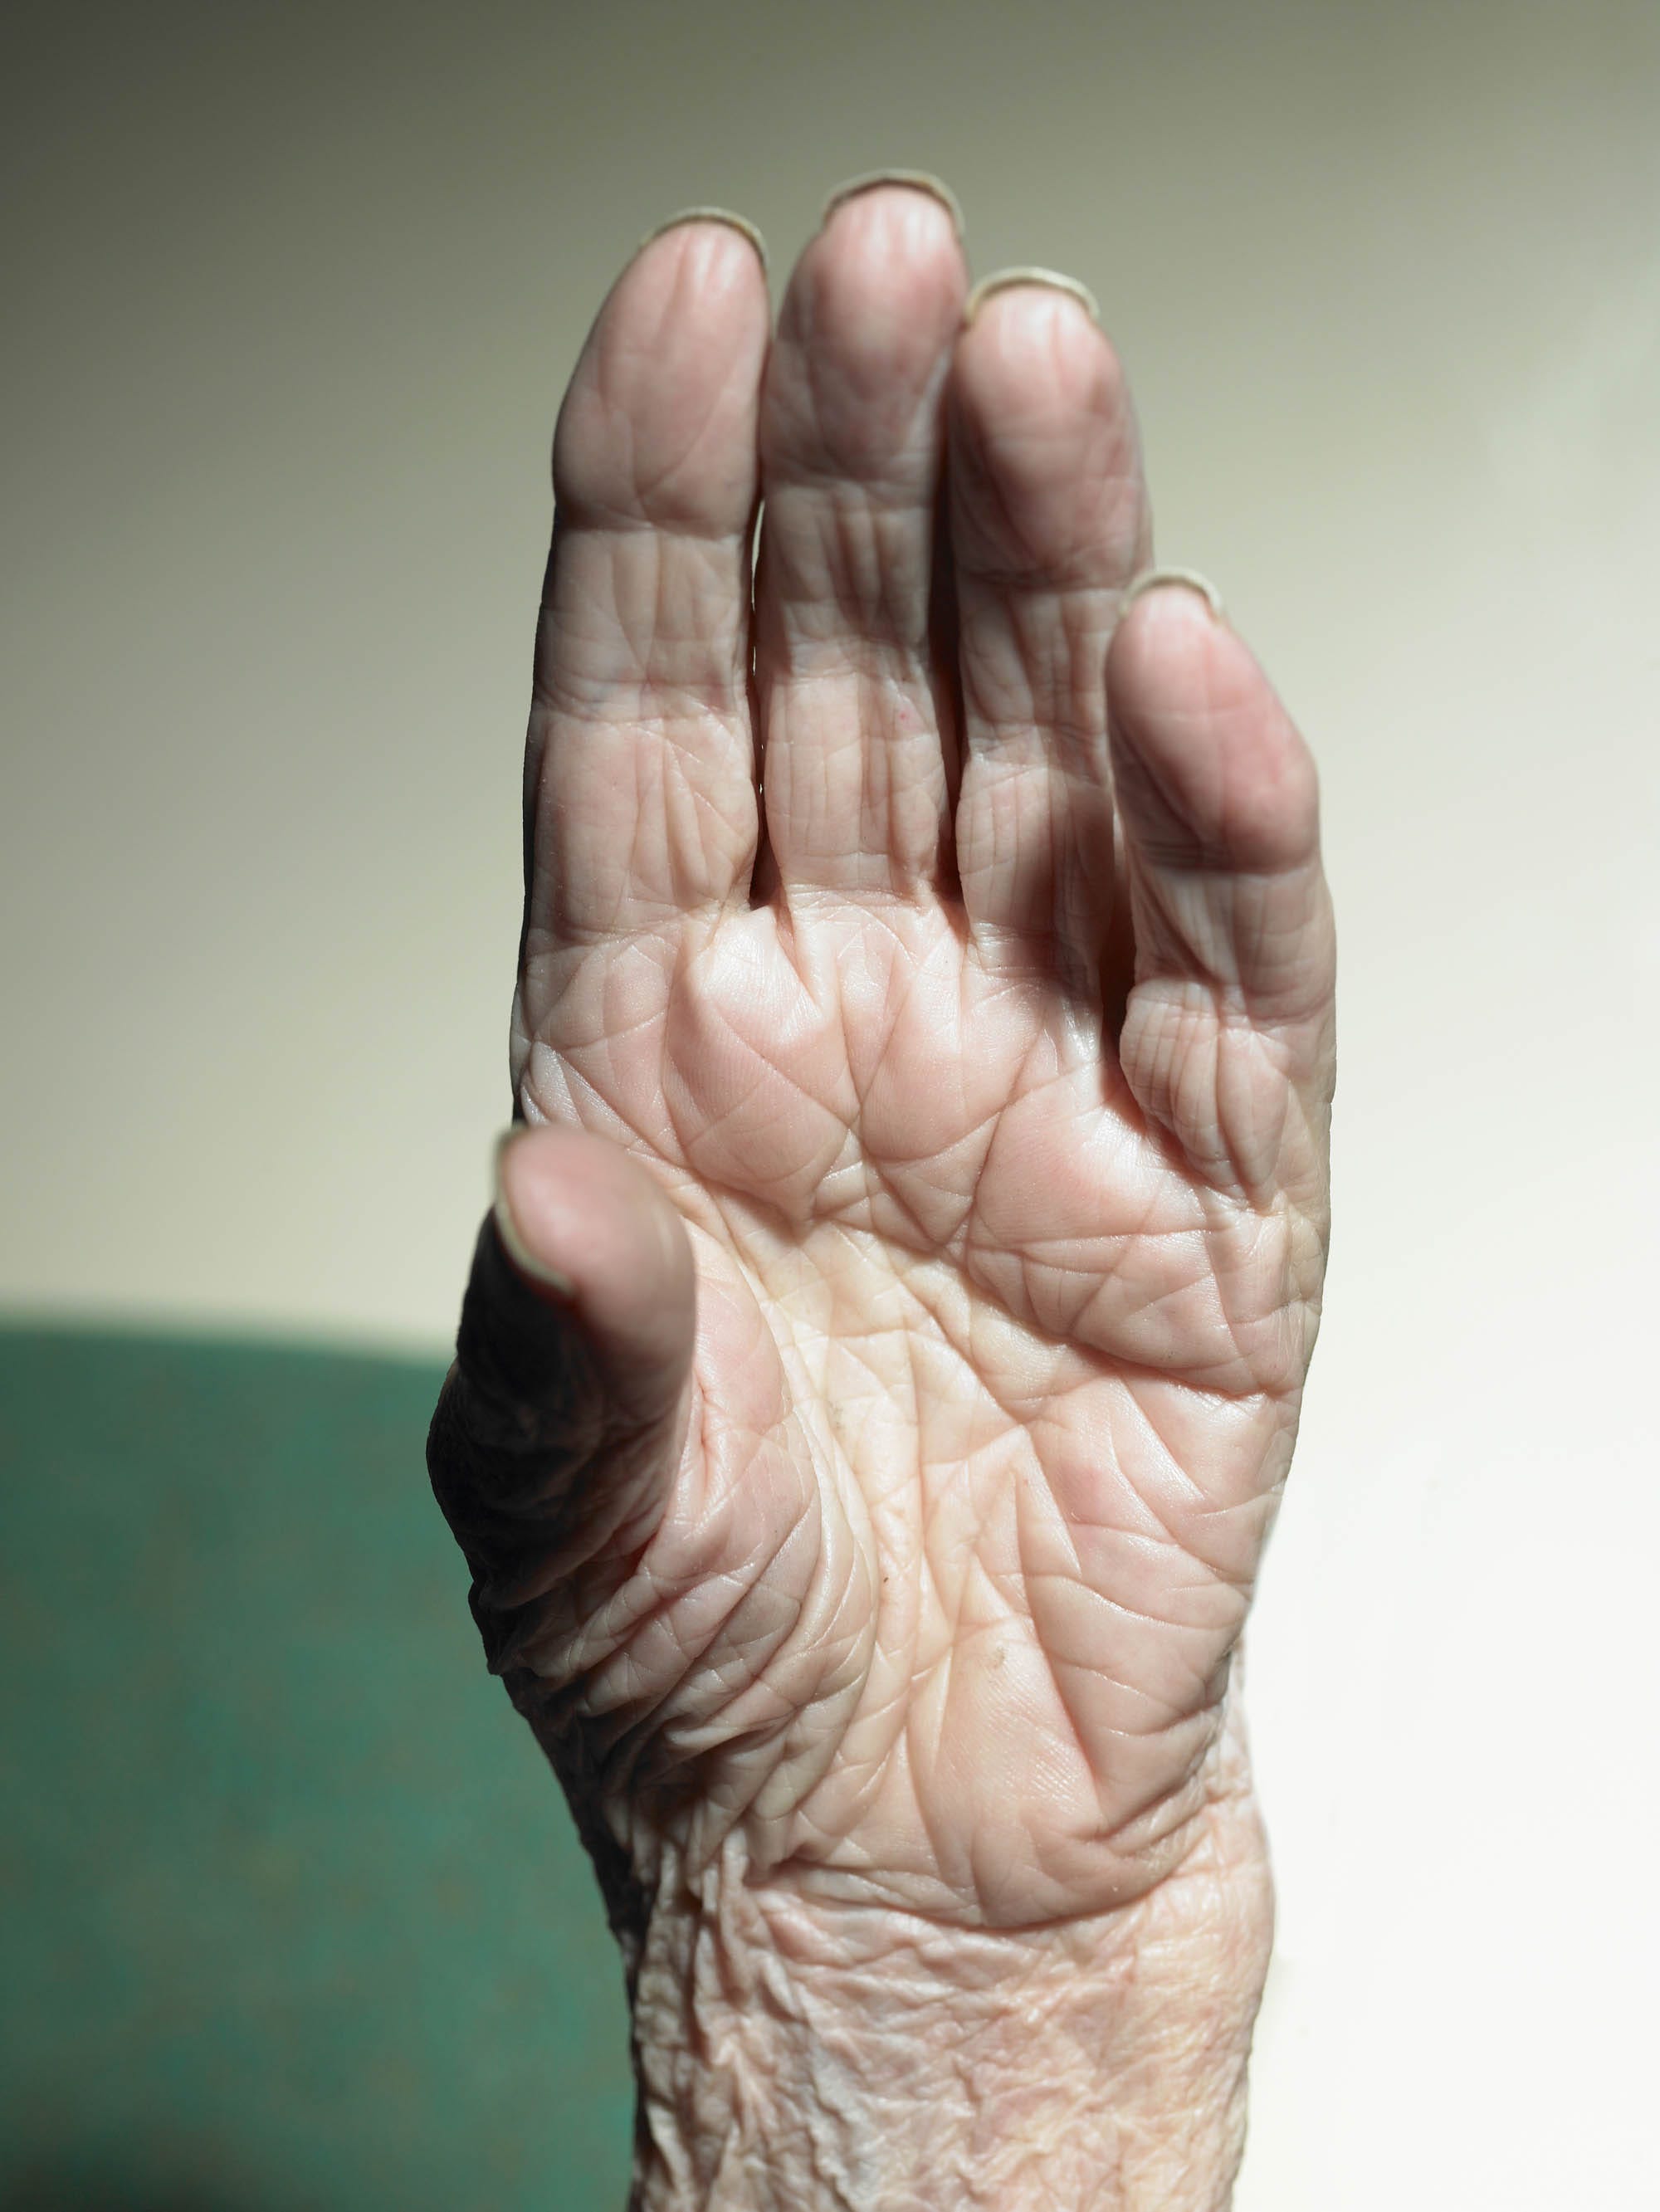 Close up of a senior woman's wrinkled hand